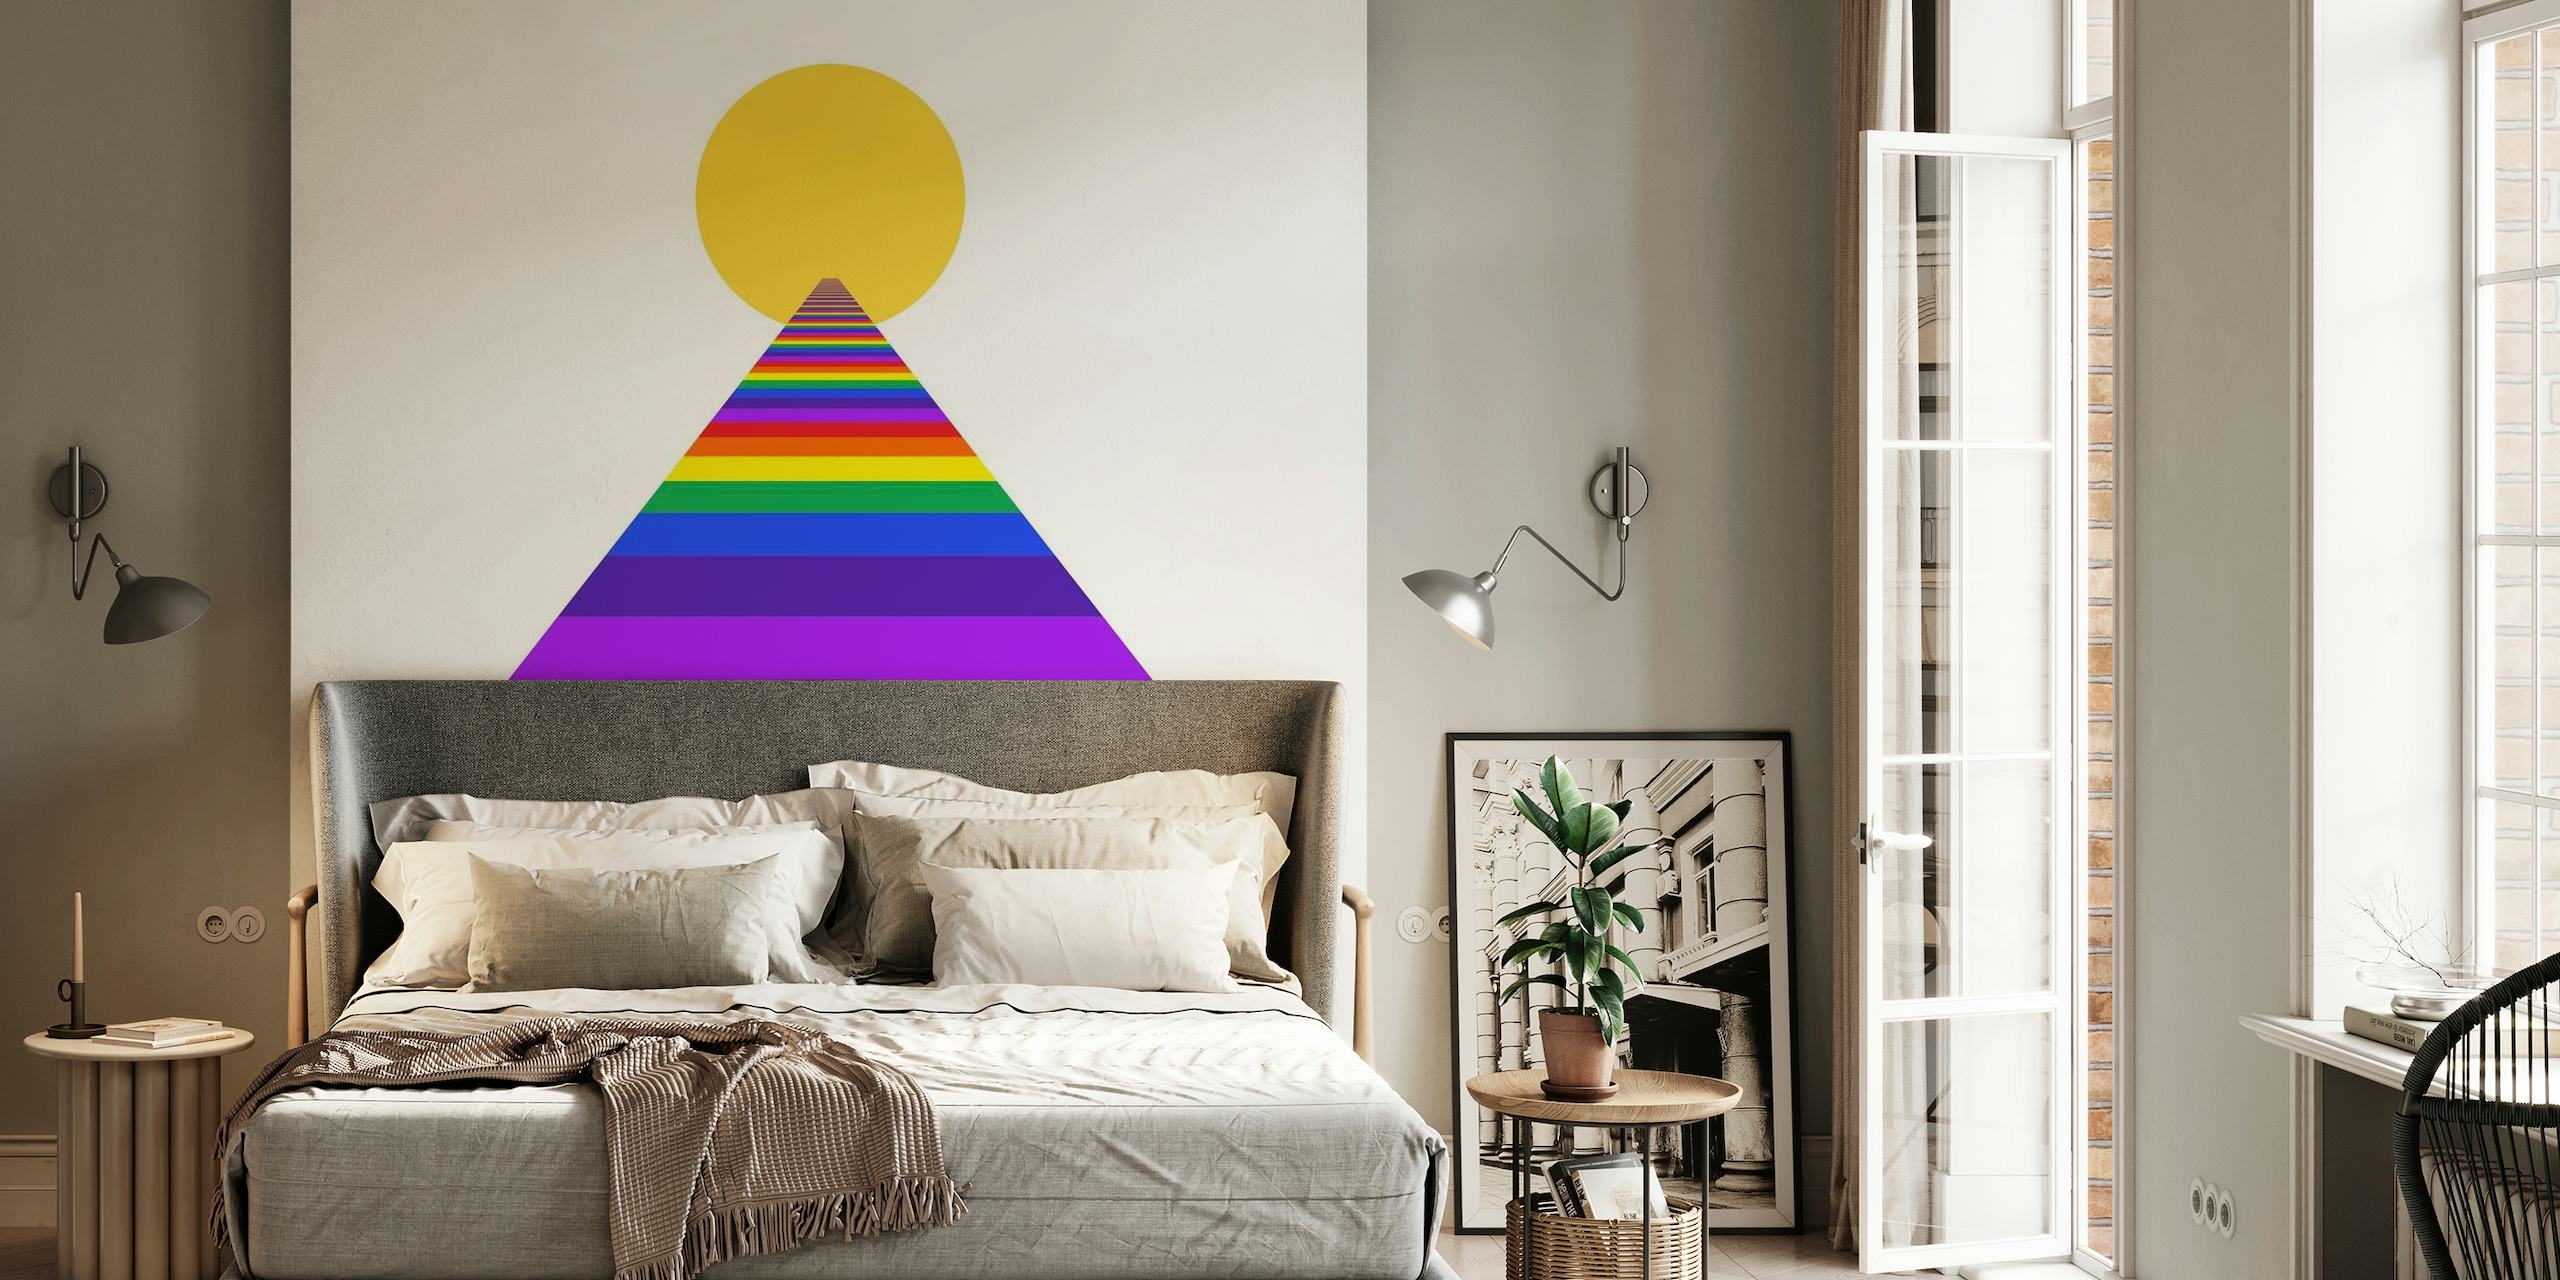 Colorful 'Raise Your Vibration' wall mural with a rainbow pyramid and sun